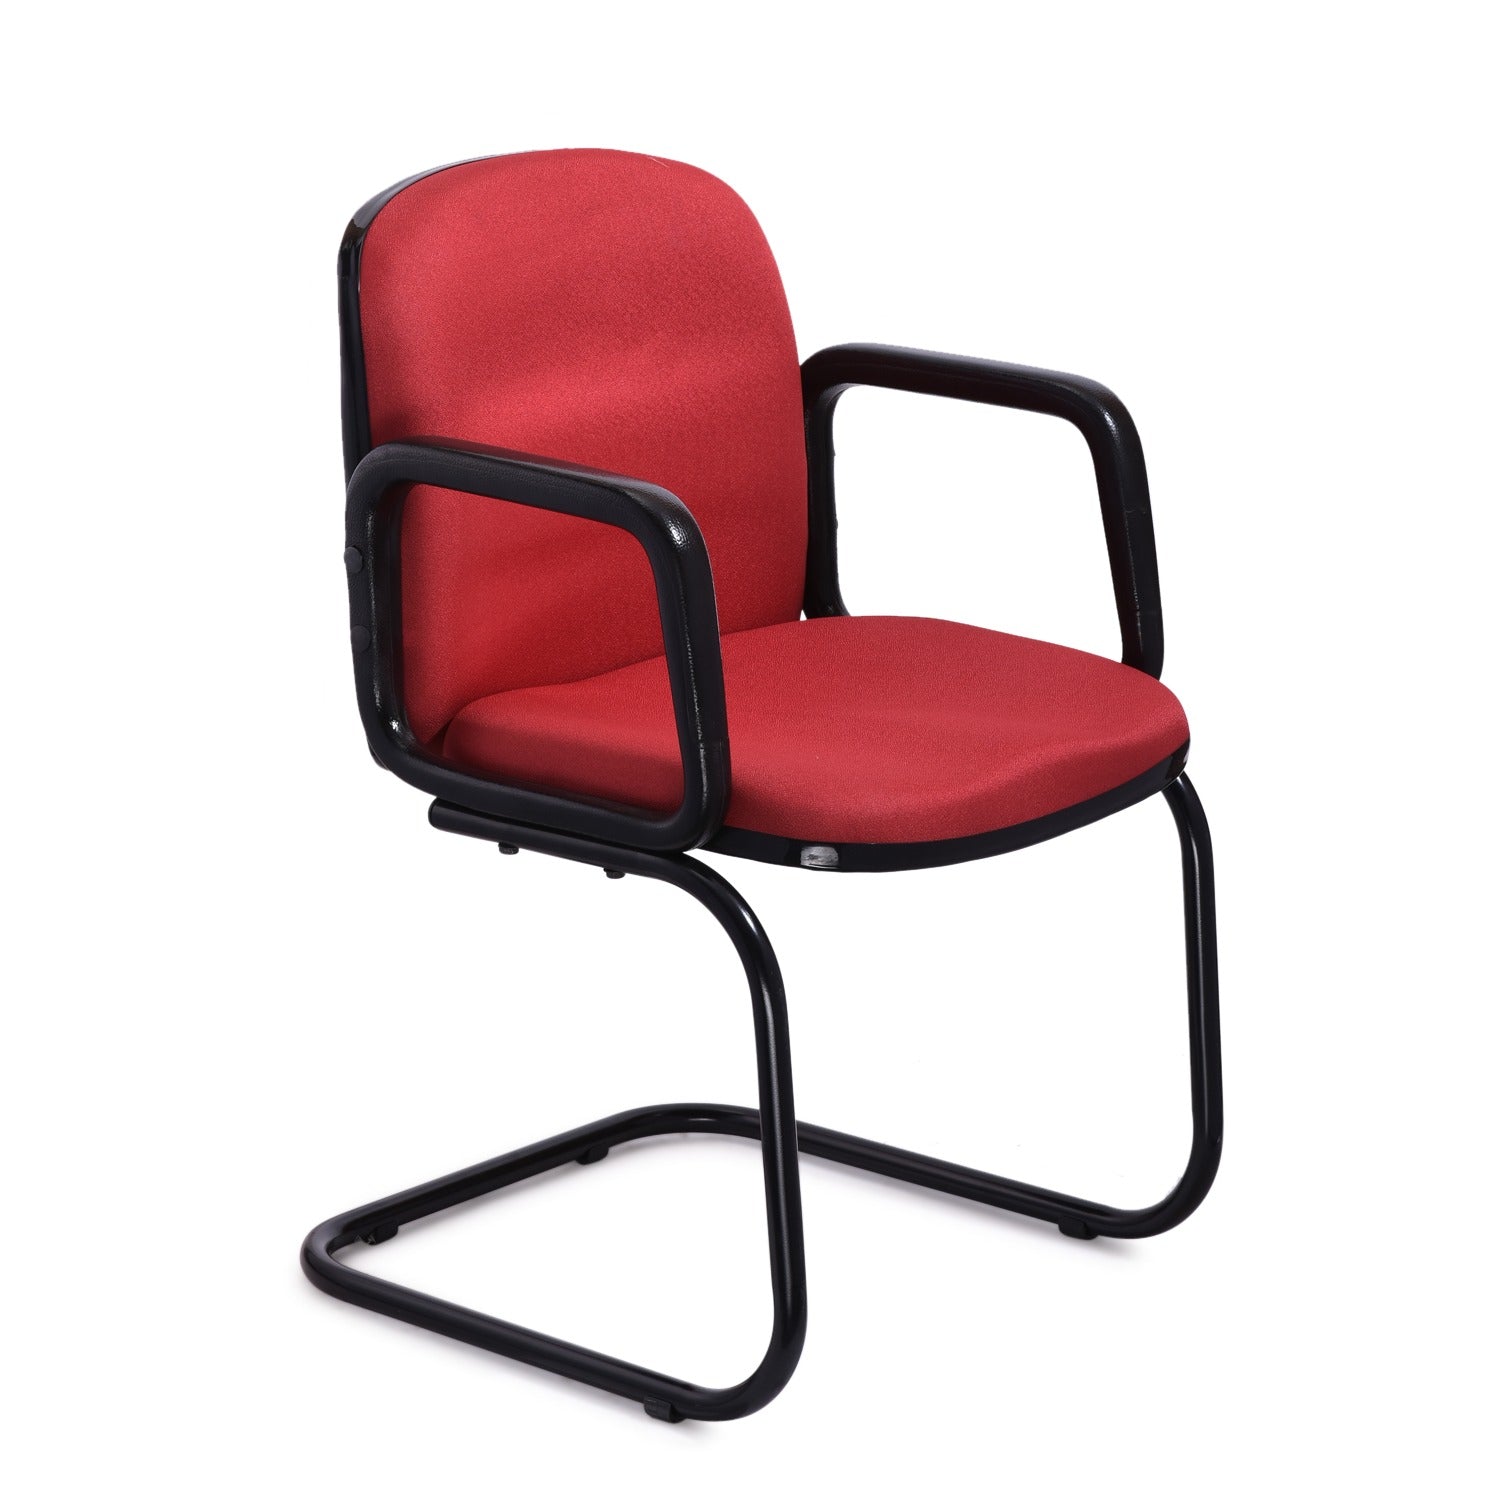 ZSV1025 Medium Back Chair by Zorin in Red Color Zorin